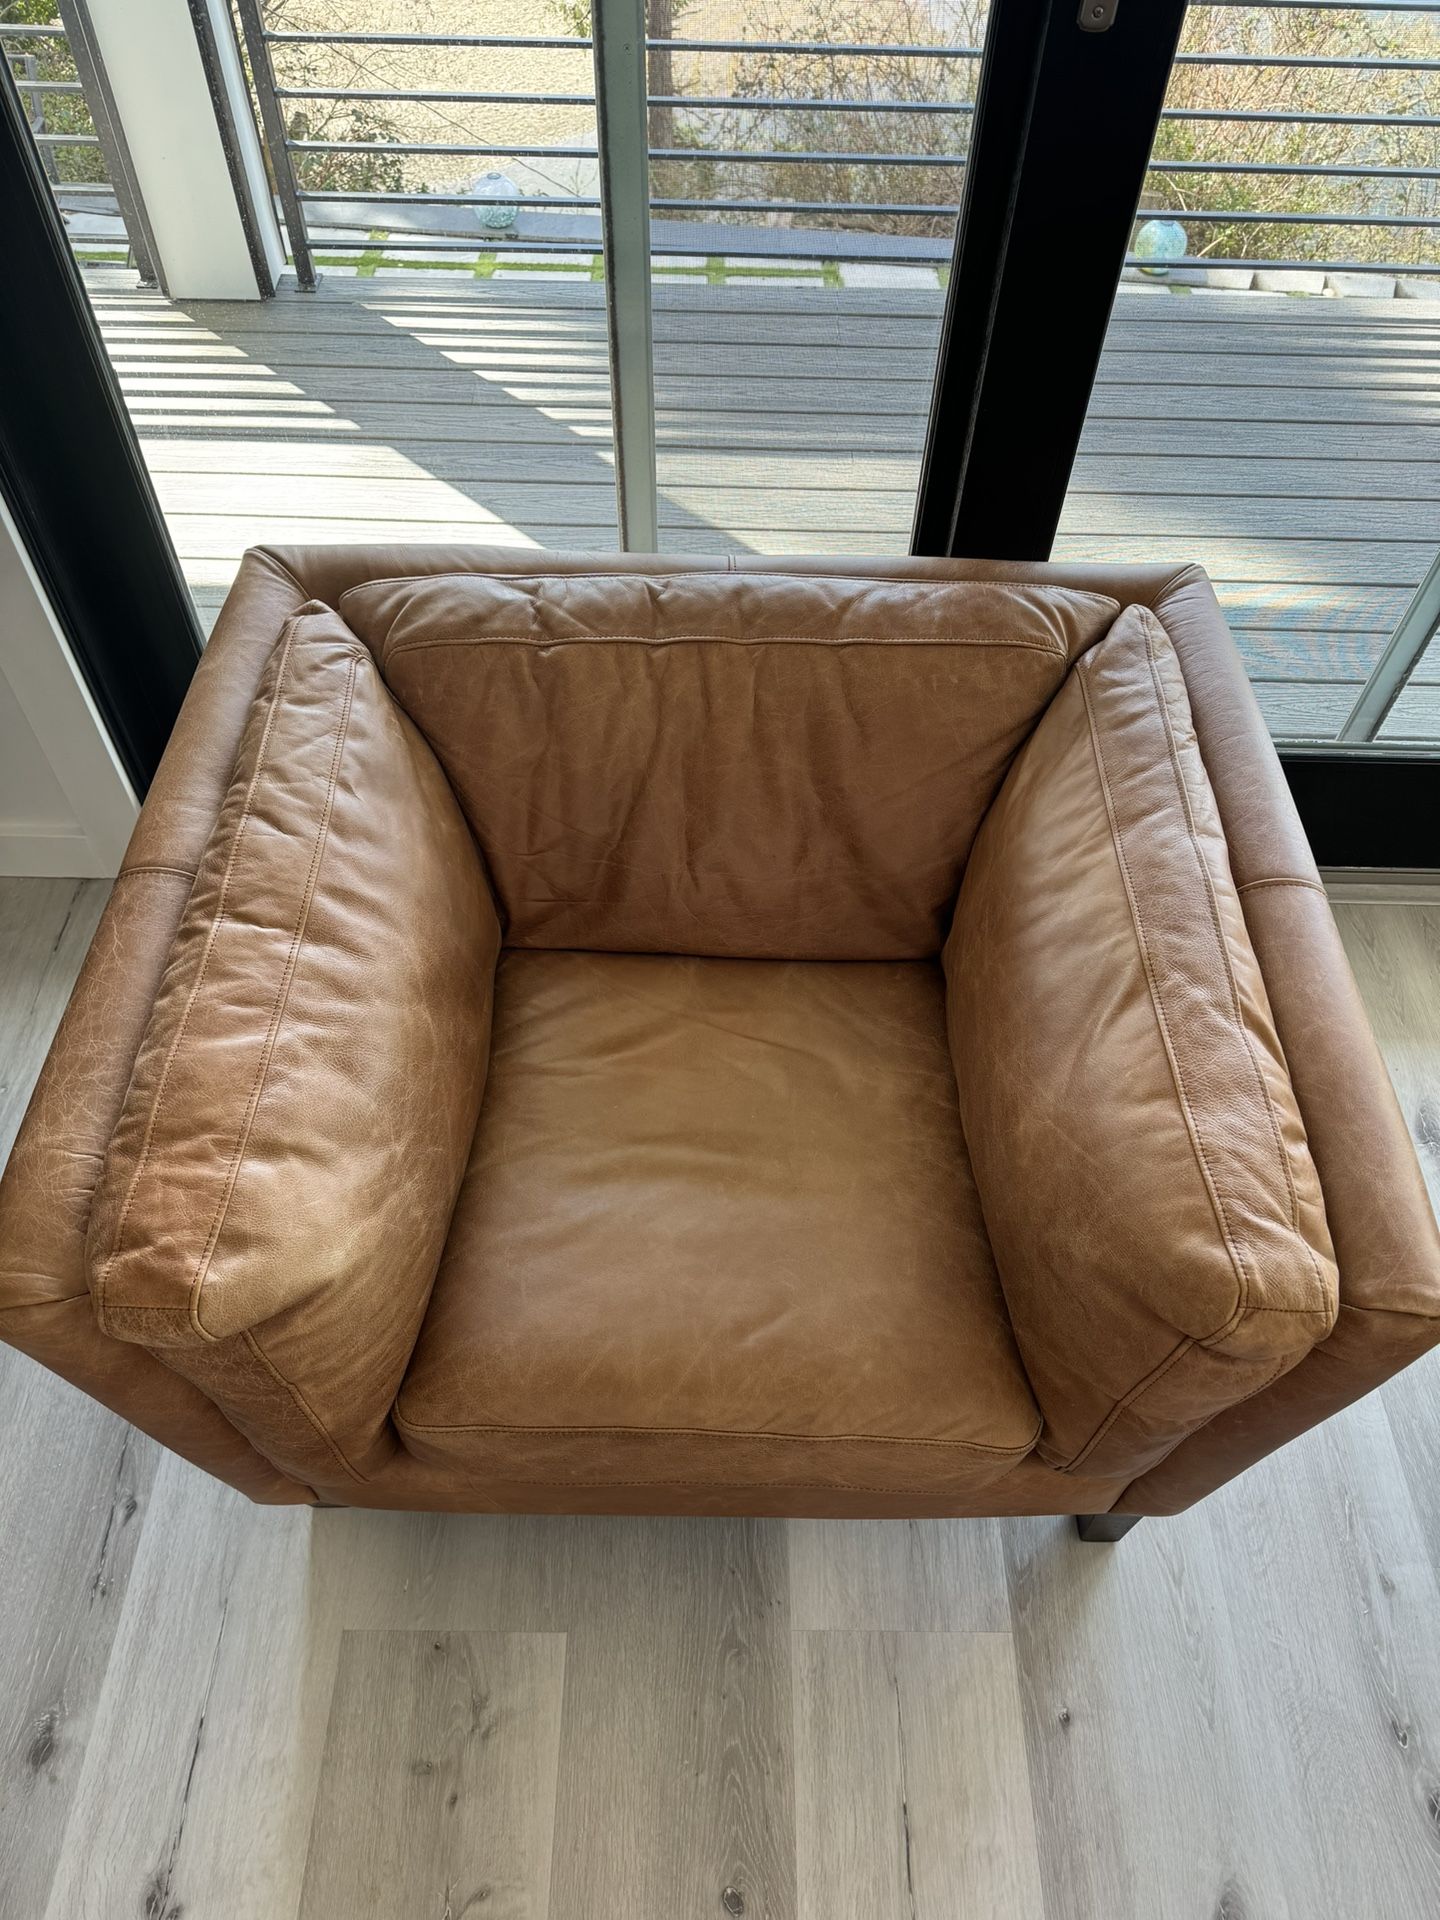 Large, leather armchair